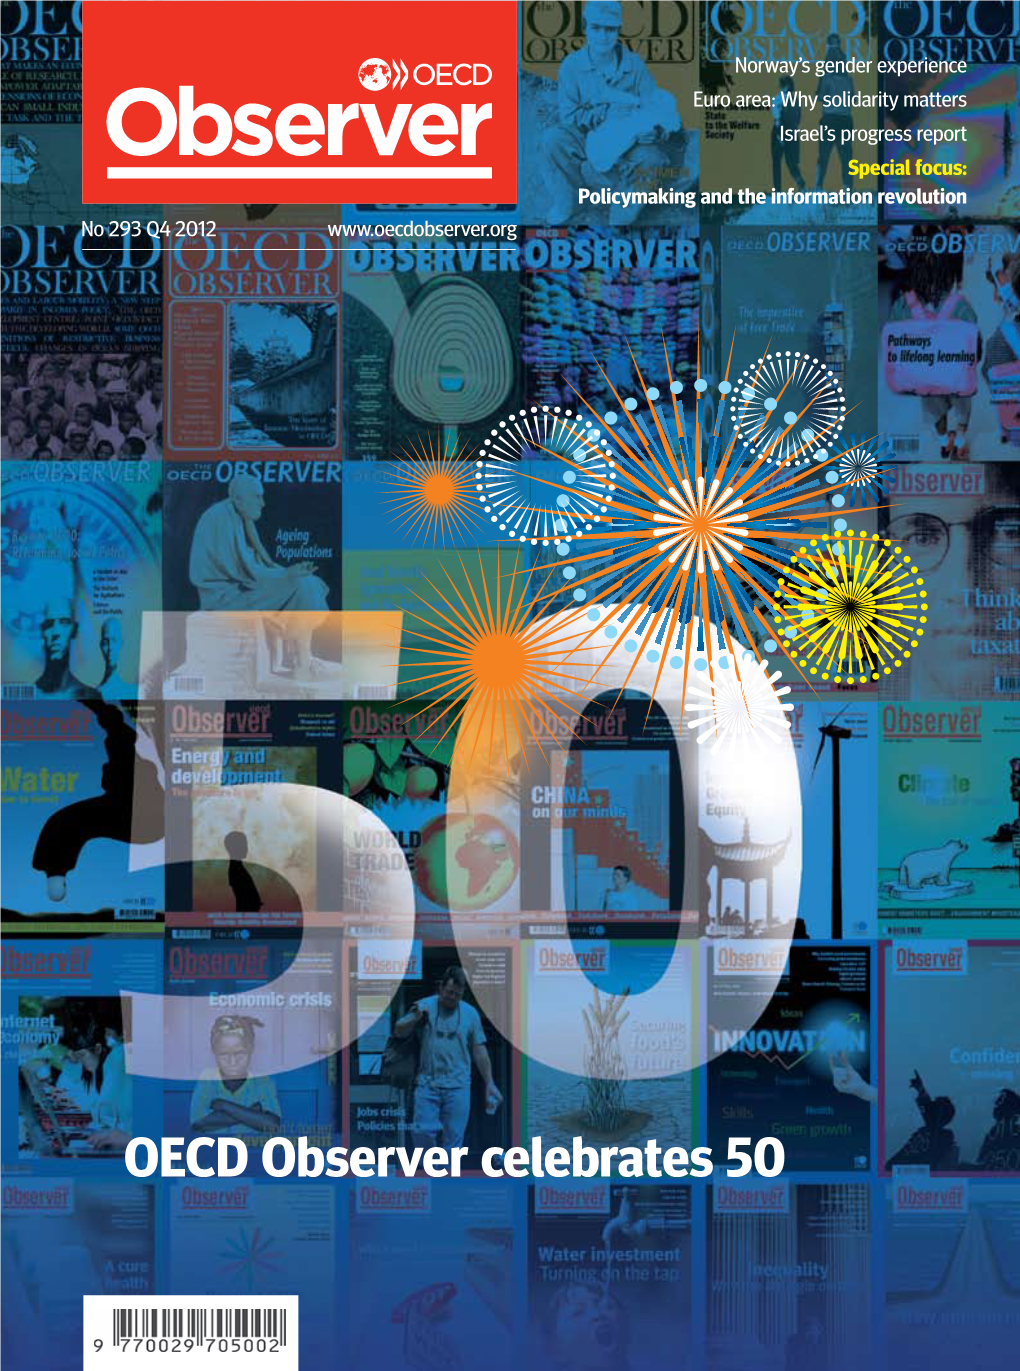 OECD Observer Celebrates 50 Meeting the Global Water Challenge